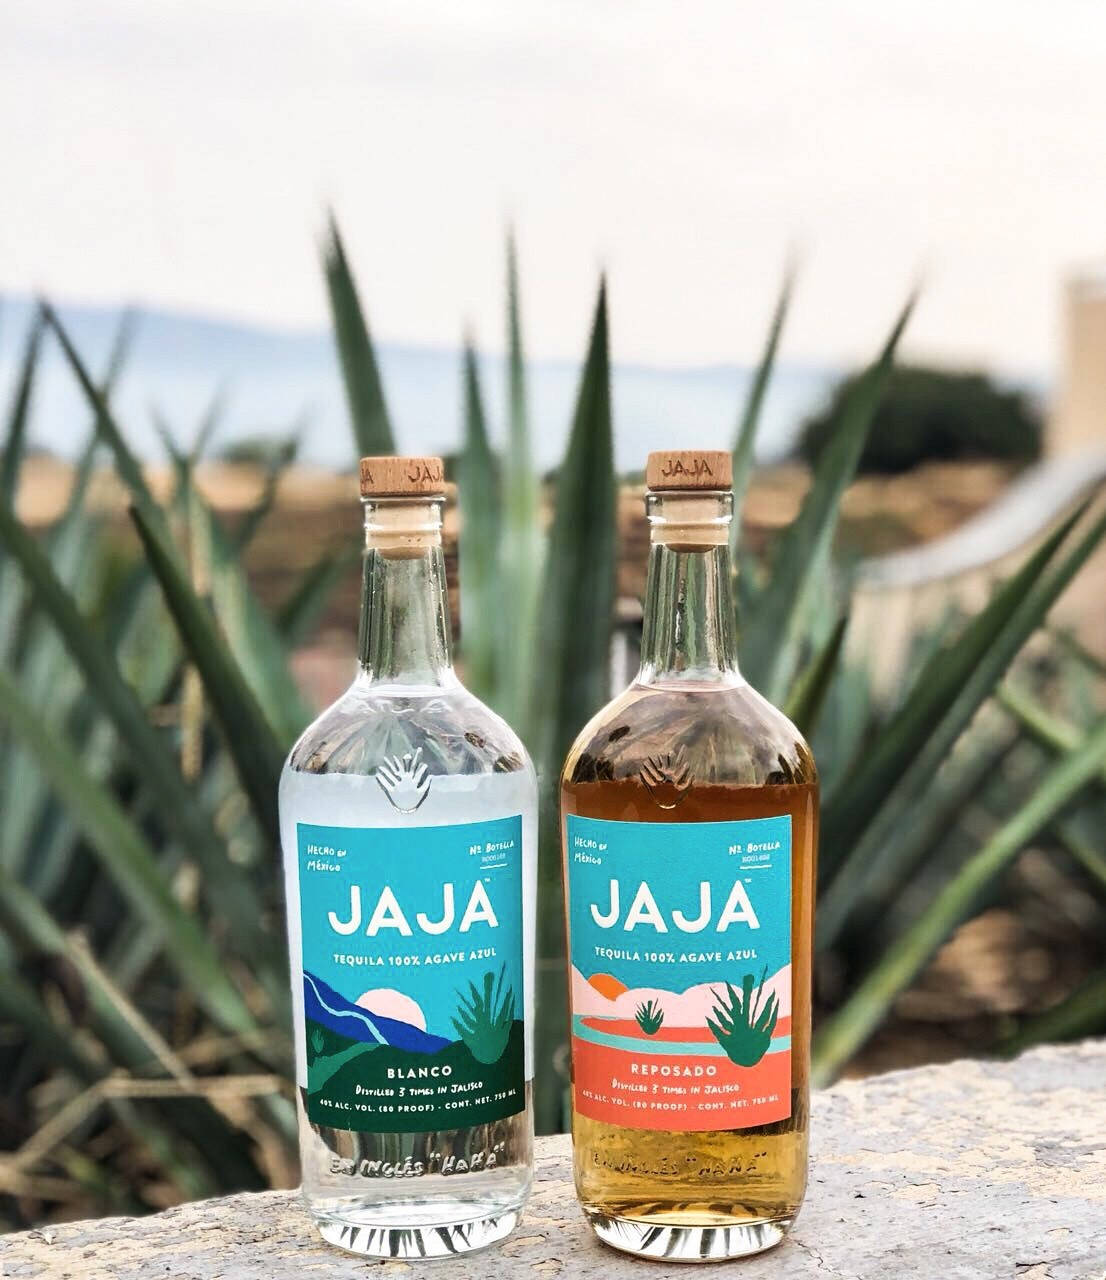 Jajatequila Reposado Och Blanco Utan Tagg. (this Sentence Describes The Title Or Name Of A Computer Or Mobile Wallpaper Featuring The Two Types Of Jaja Tequila.) Wallpaper